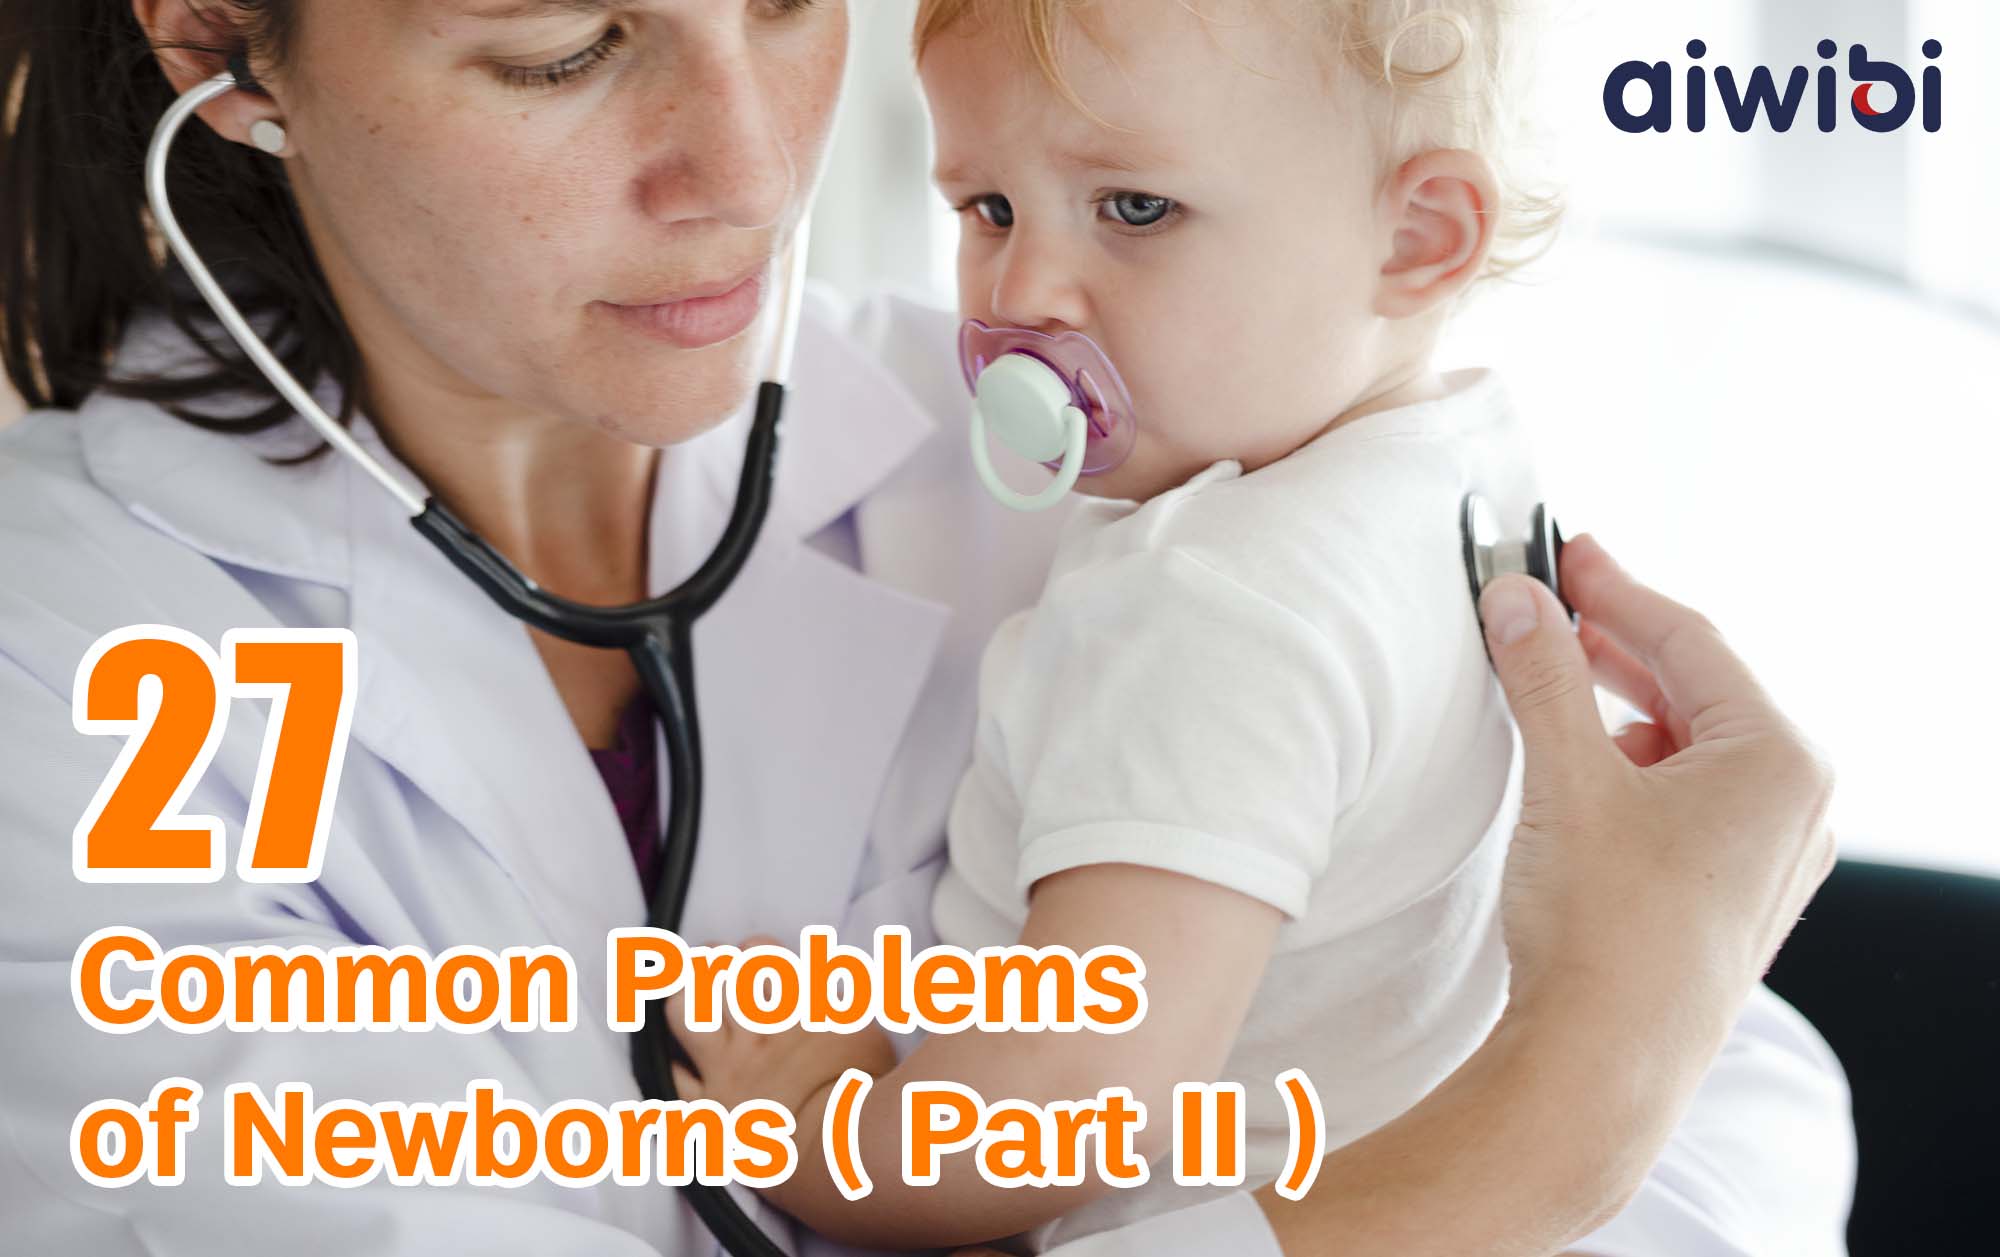 Parents Must Know How to Deal With the 27 Common Problems of Newborns（Part II）